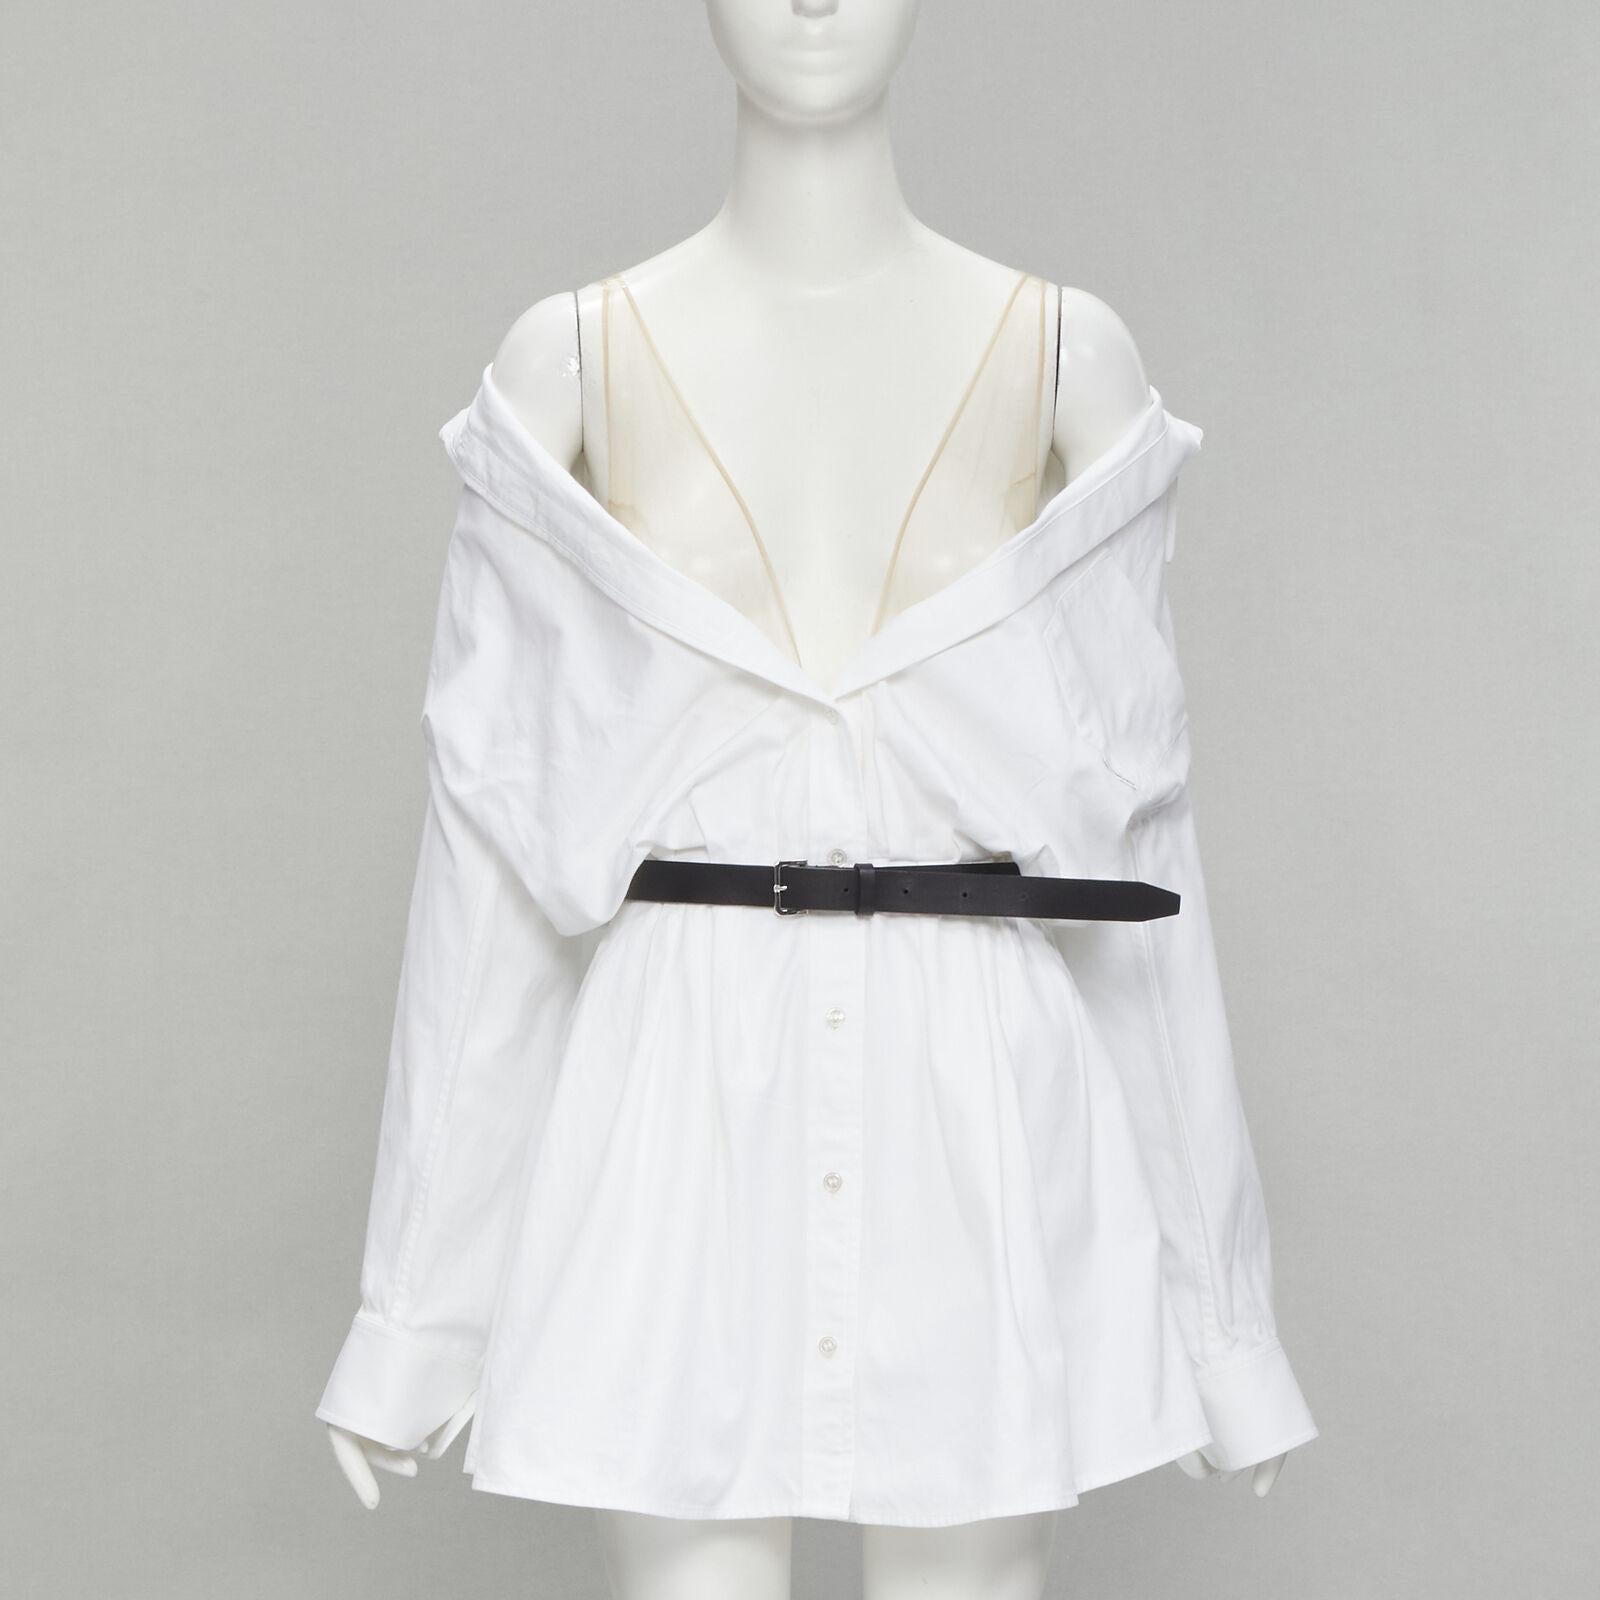 ALEXANDER WANG white cotton off shoulder black leather belted shirt dress US2 XS
Reference: KNLM/A00126
Brand: Alexander Wang
Designer: Alexander Wang
Material: Cotton, Leather
Color: White, Black
Pattern: Solid
Closure: Button
Extra Details: Logo